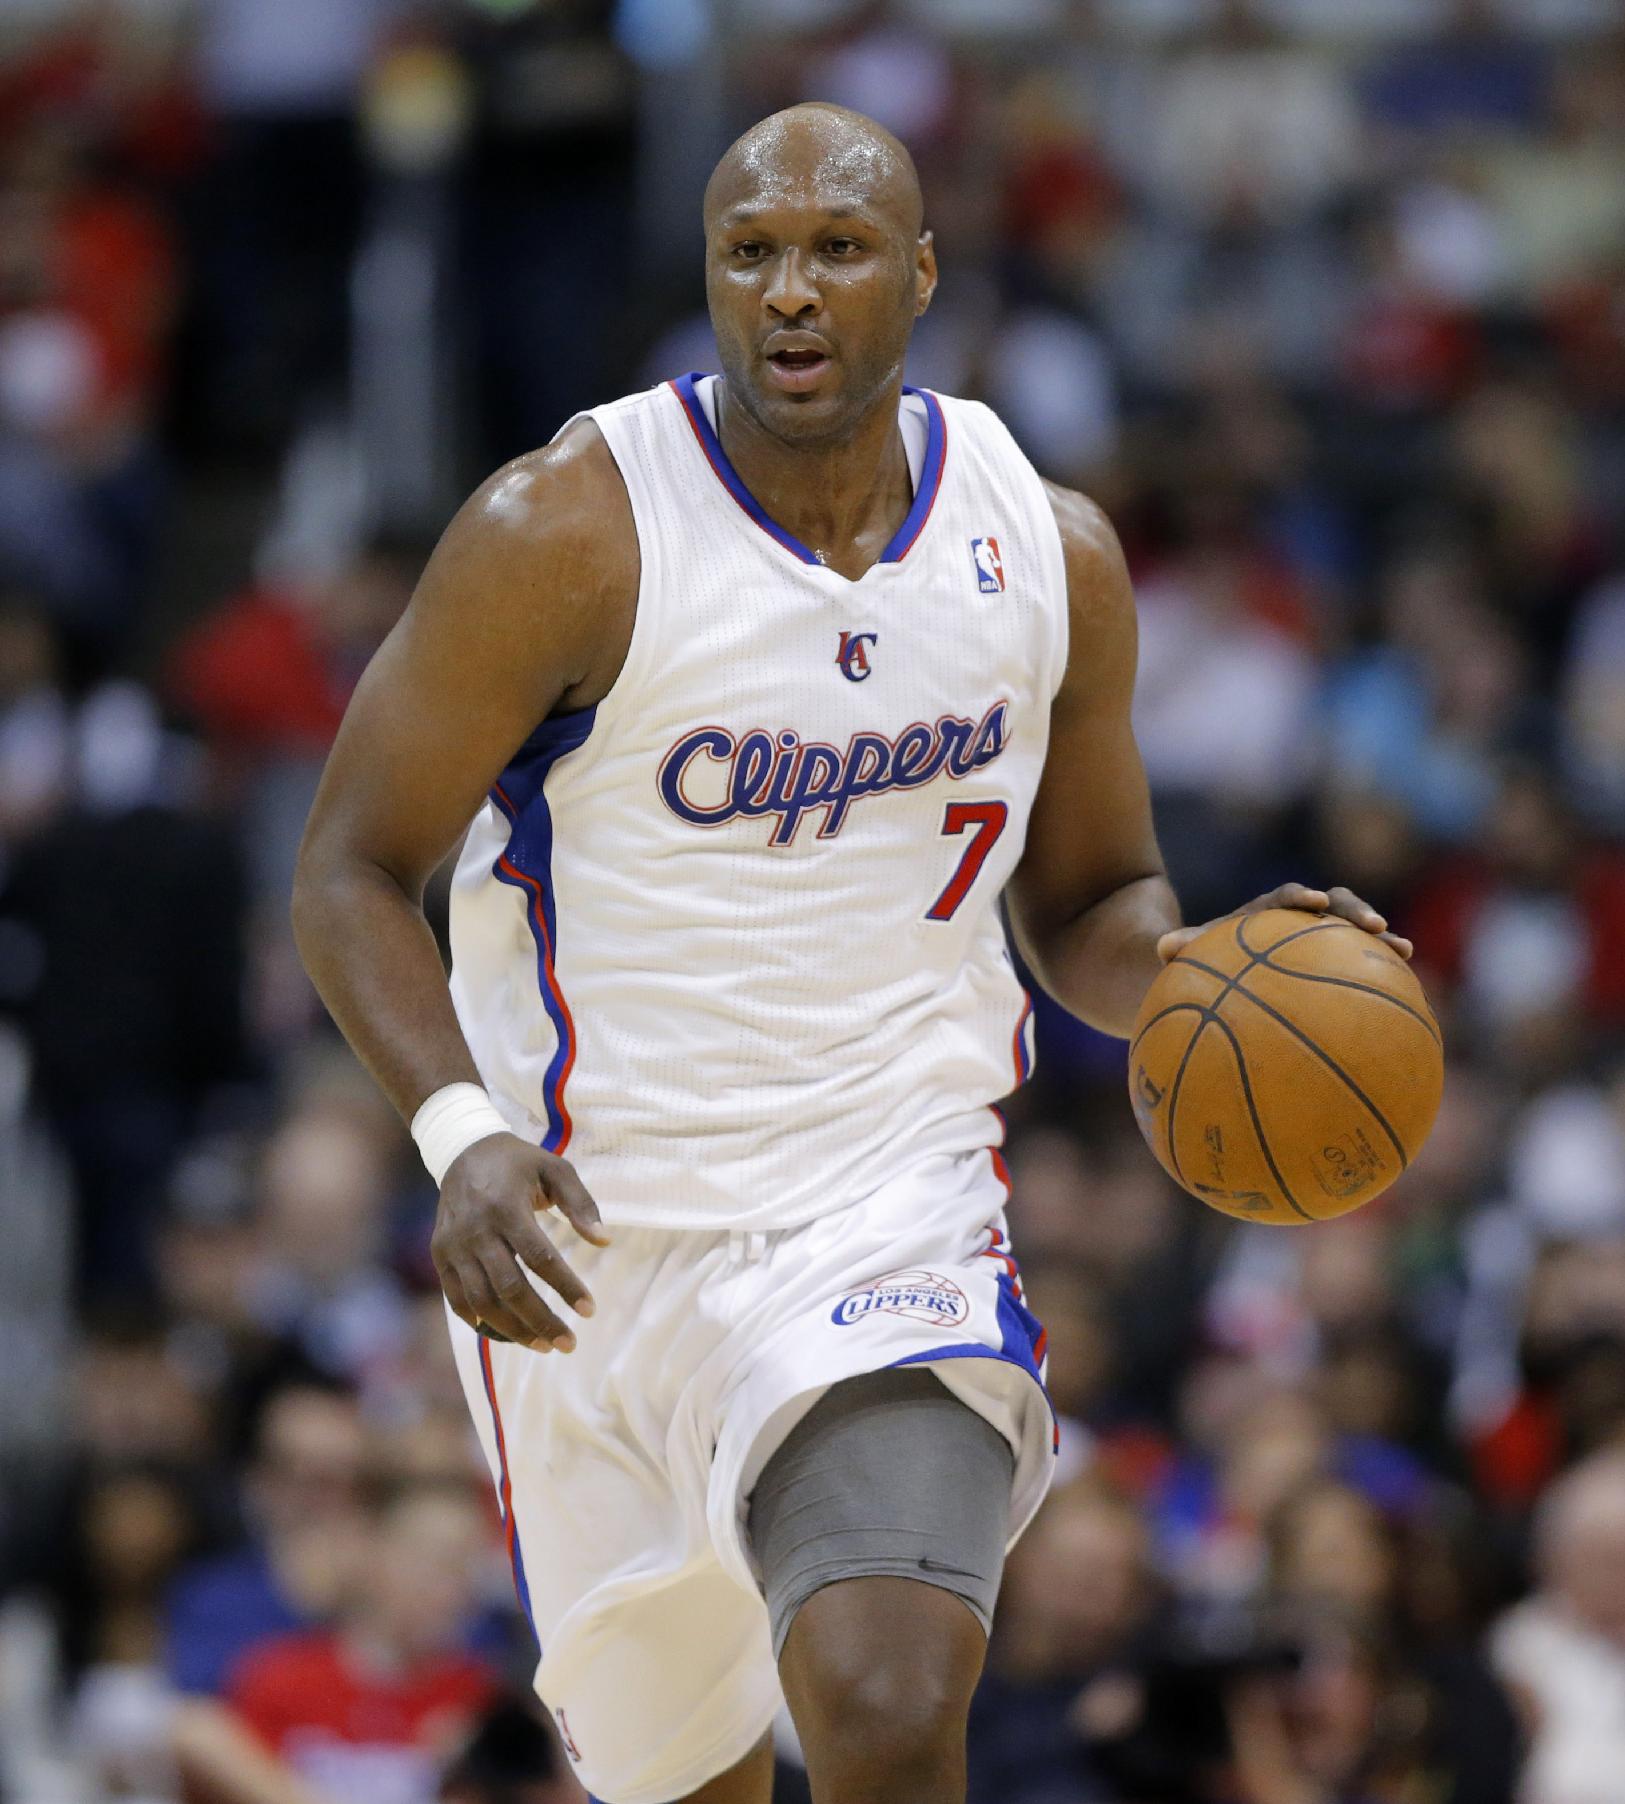 In this Dec. 8, 2012, photo, Los Angeles Clippers' Lamar Odom brings the ball up in an NBA basketball game against the Phoenix Suns in Los Angeles. The New York Knicks have signed Odom, who was out of the league this season. The move gives new president Phil Jackson an offseason to look at the versatile forward who thrived in his system. Odom helped the Los Angeles Lakers win NBA titles in 2009 and 2010, and was the Sixth Man of the Year in 2011, Jackson's final season as coach. (AP Photo/Jae C. Hong)